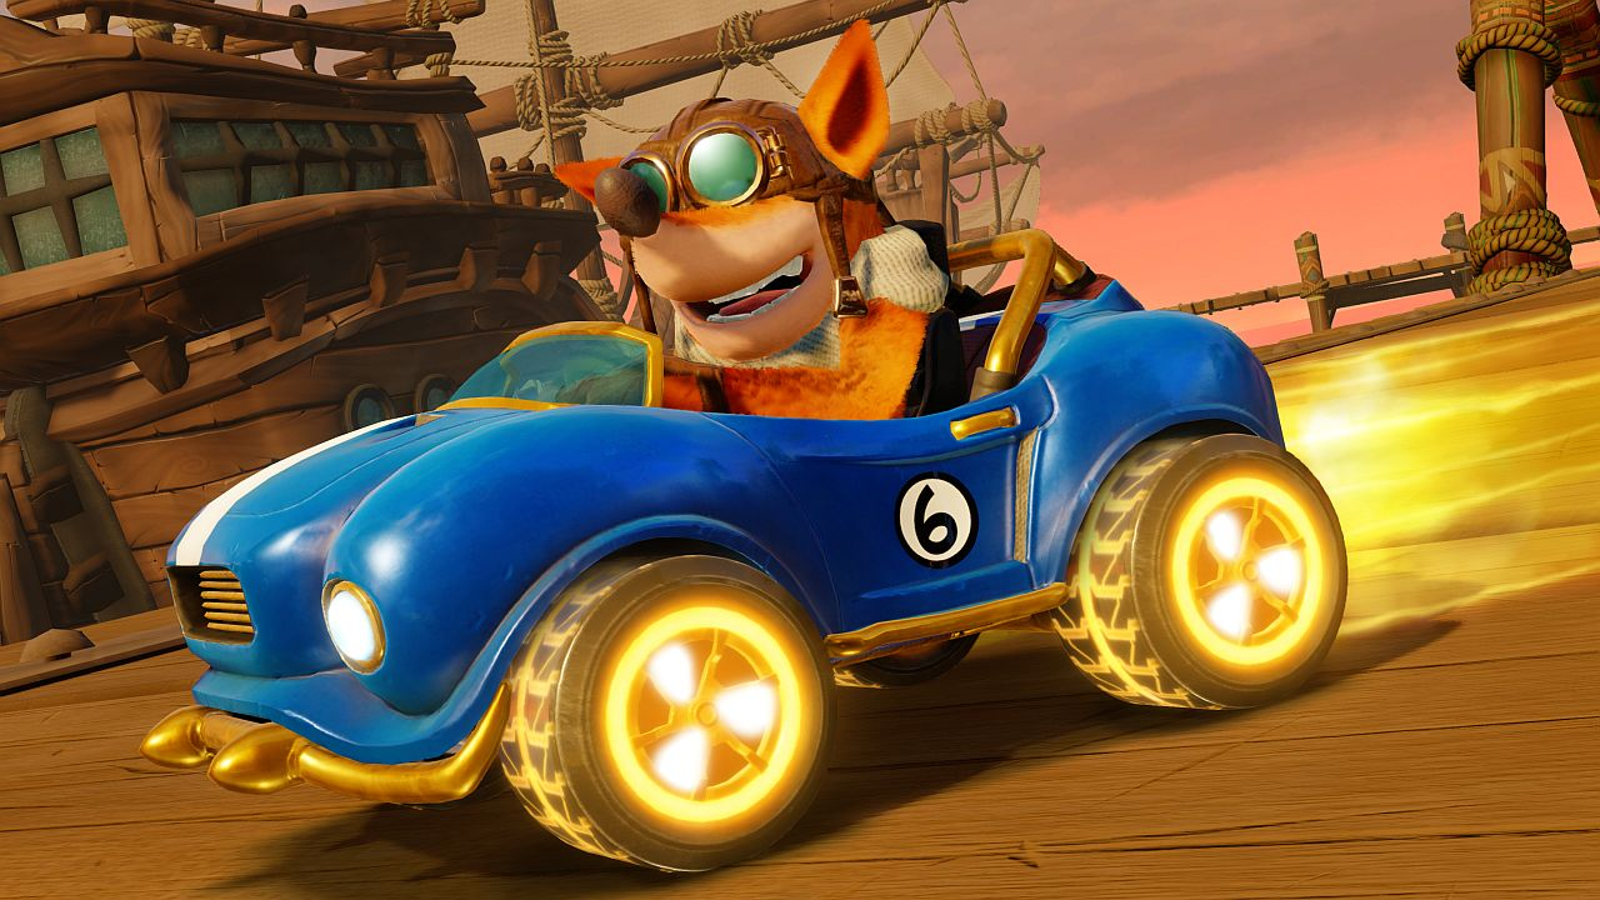 The Bandicoot Returns (and It's About Time!) Crash's Nitro-Fueled